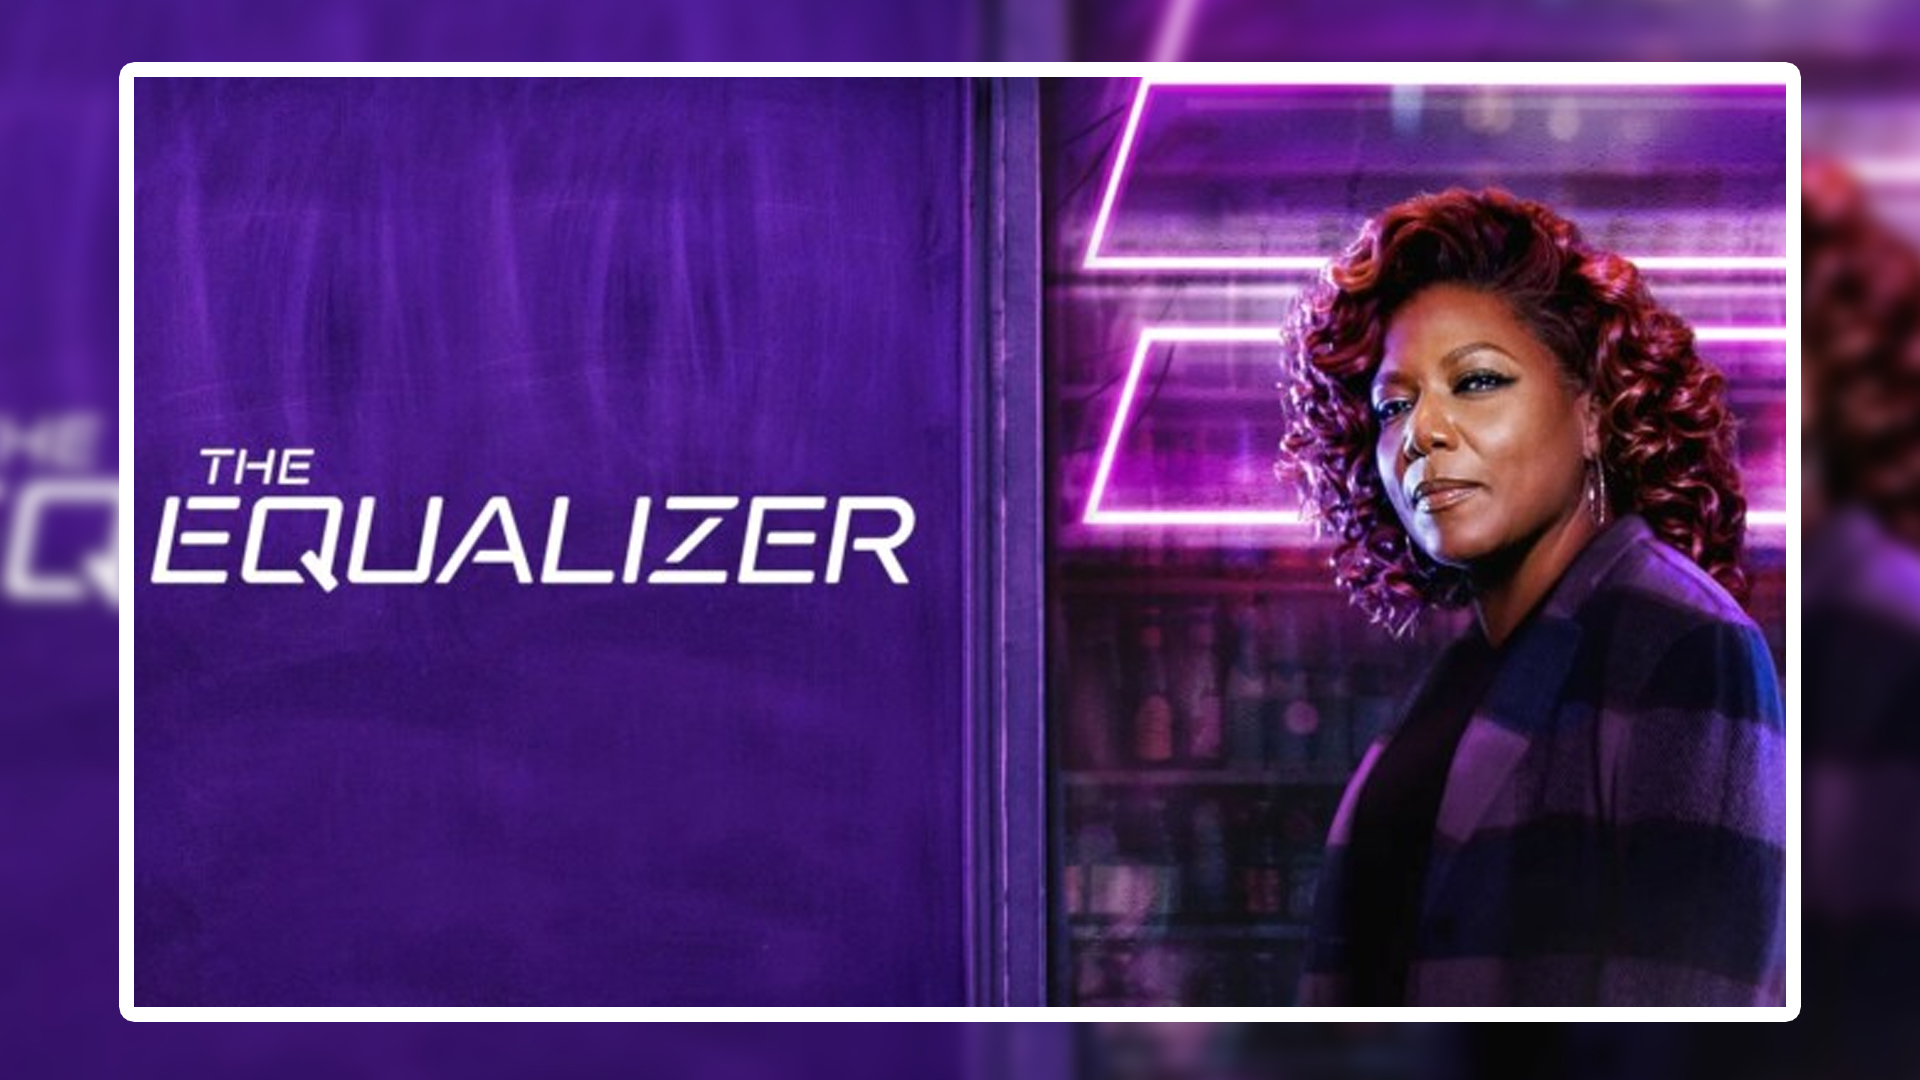 The Equalizer Season 4 Release Date, Plot, and more! DroidJournal